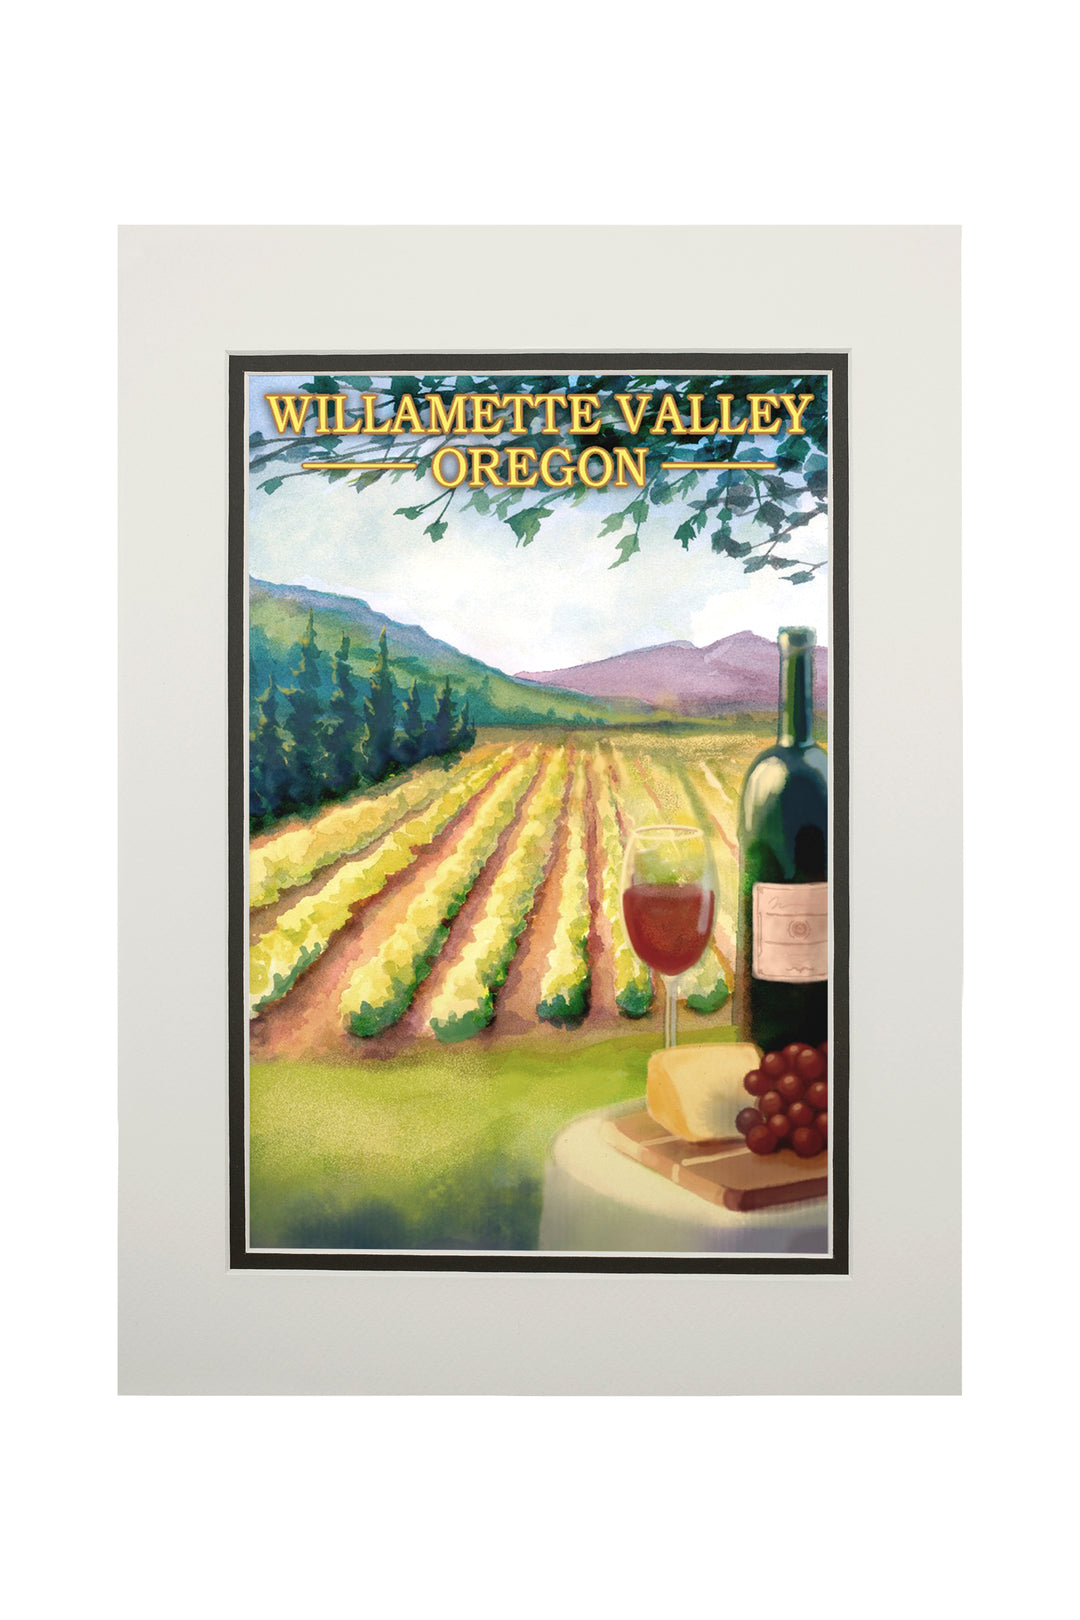 Willamette Valley, Oregon, Wine Country, Art & Giclee Prints